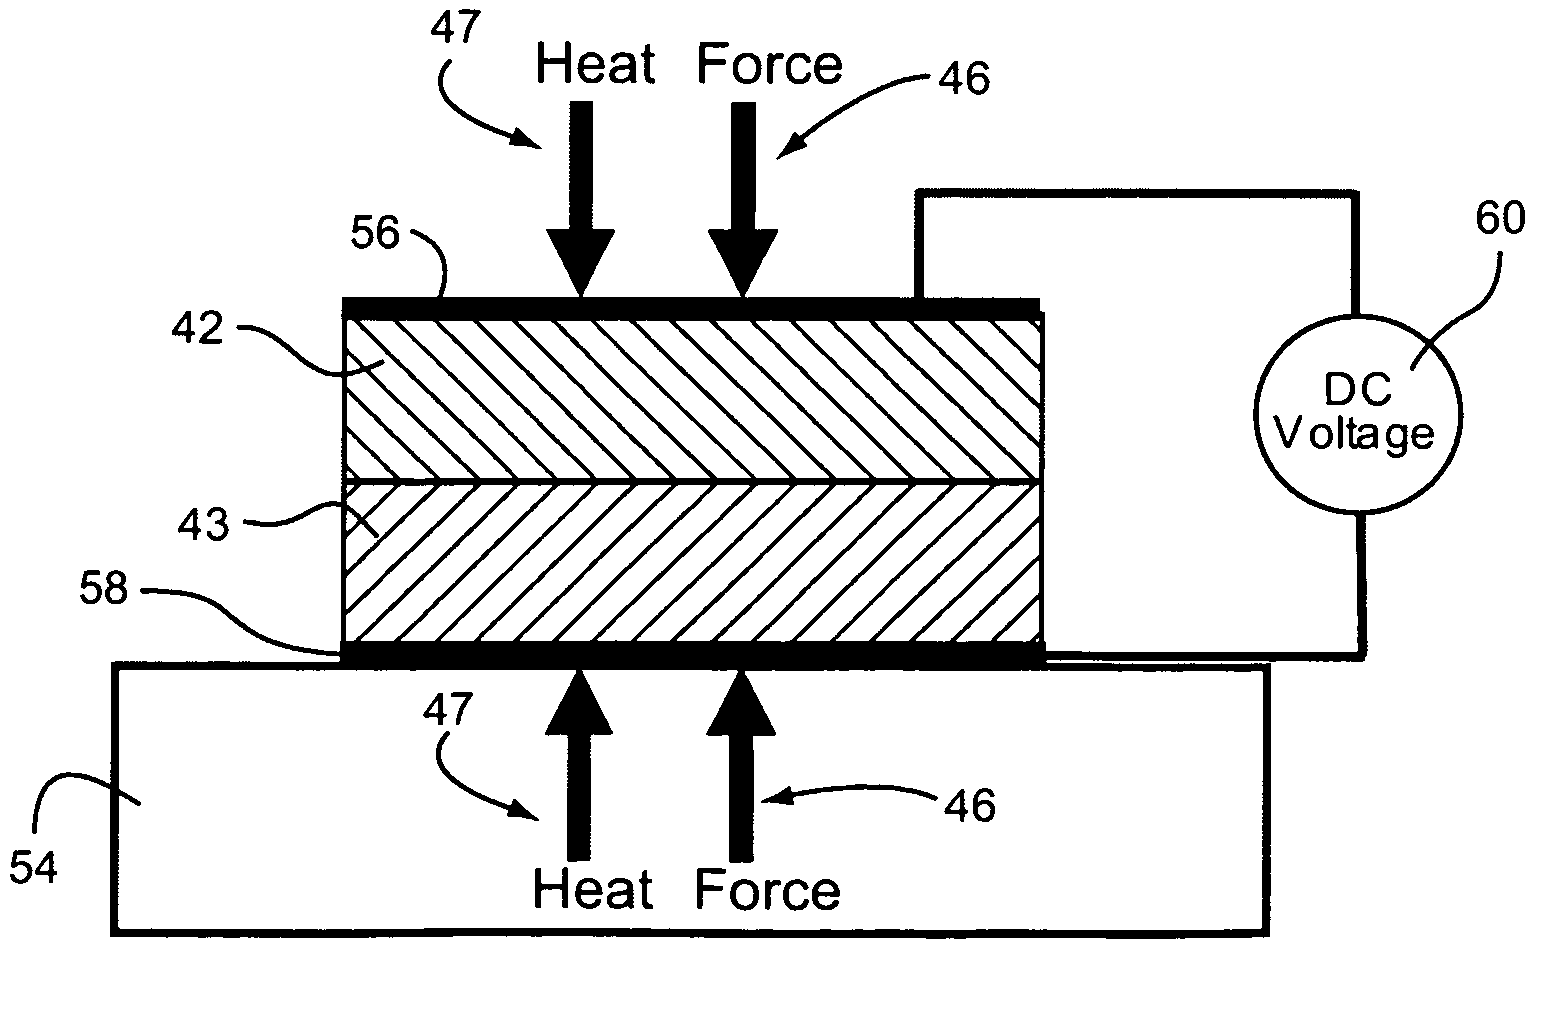 Low-temperature wafer bonding of semiconductor substrates to metal substrates